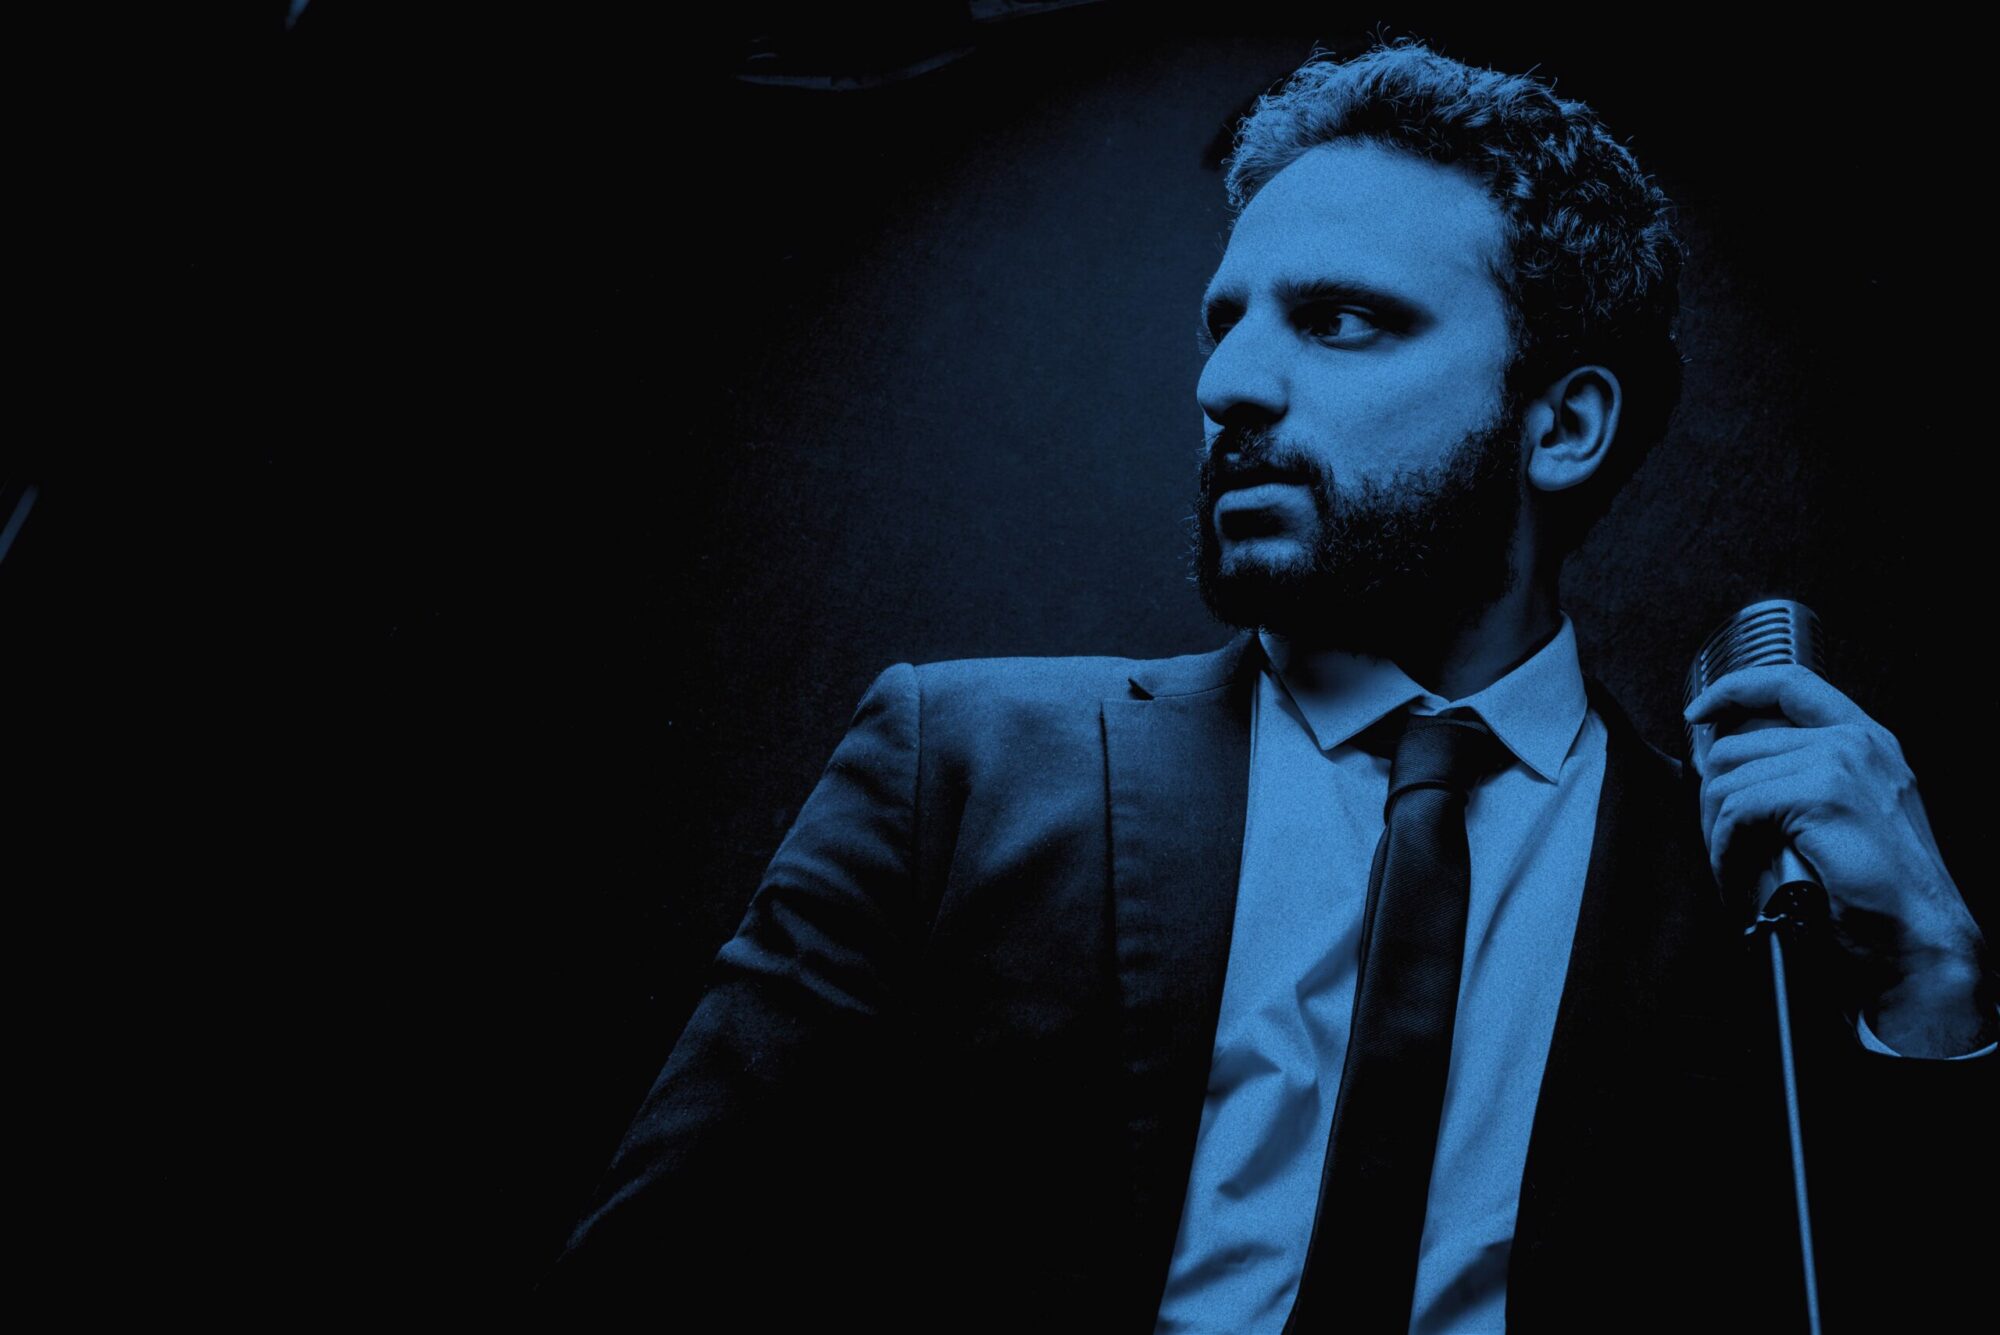 Image name Nish Kumar at Leadmill Sheffield scaled the 1 image from the post Nish Kumar: Nish, Don't Kill My Vibe at Scarborough Spa Theatre, Scarborough in Yorkshire.com.